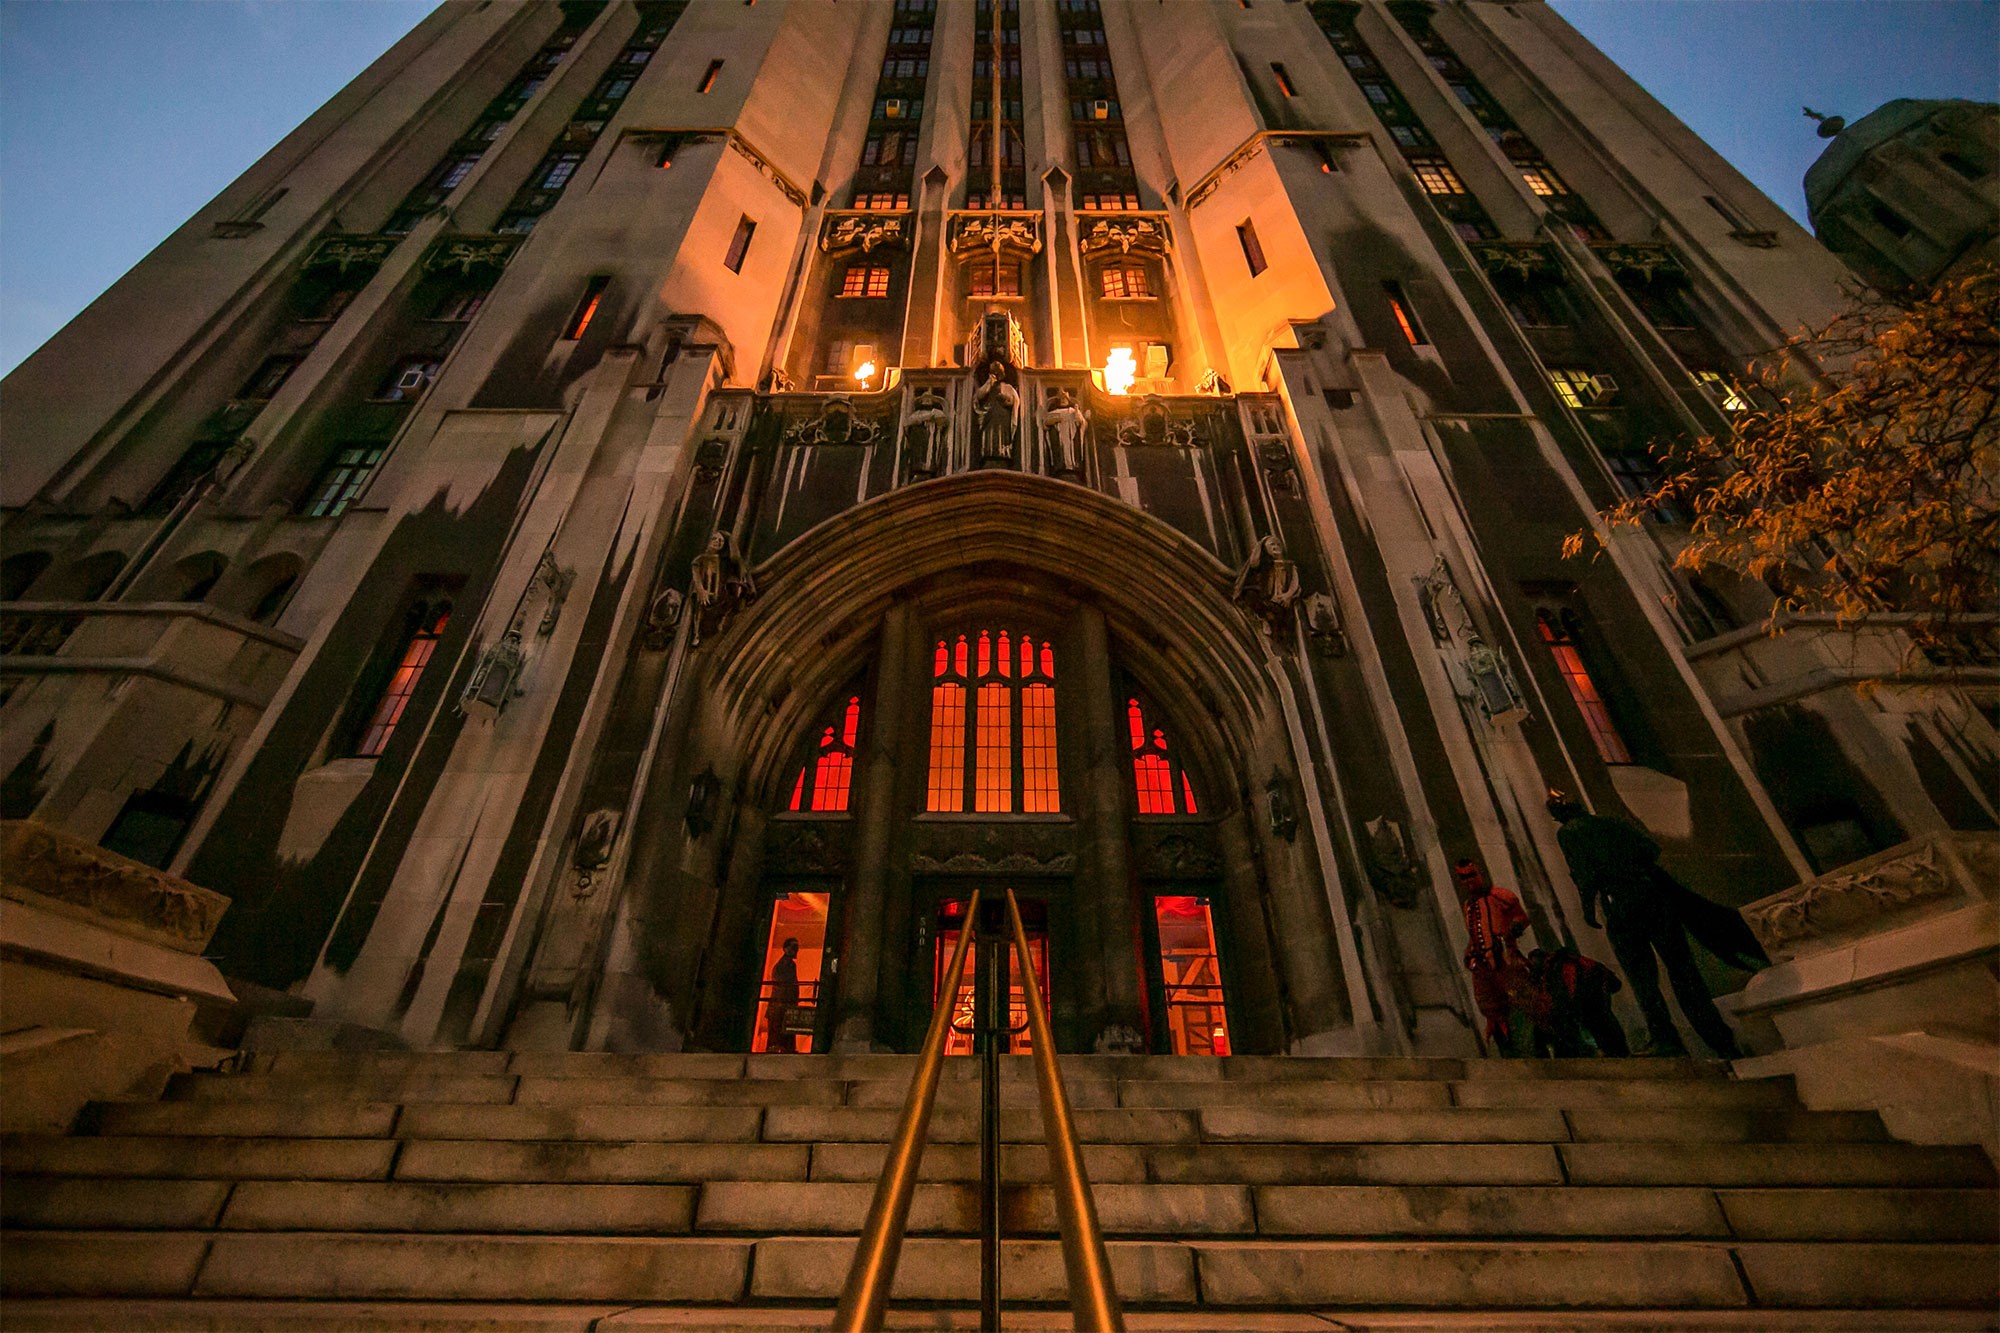 Detroit S Masonic Temple To Get 2 Million Upgrade Under New Deal With Aeg Presents City Slang